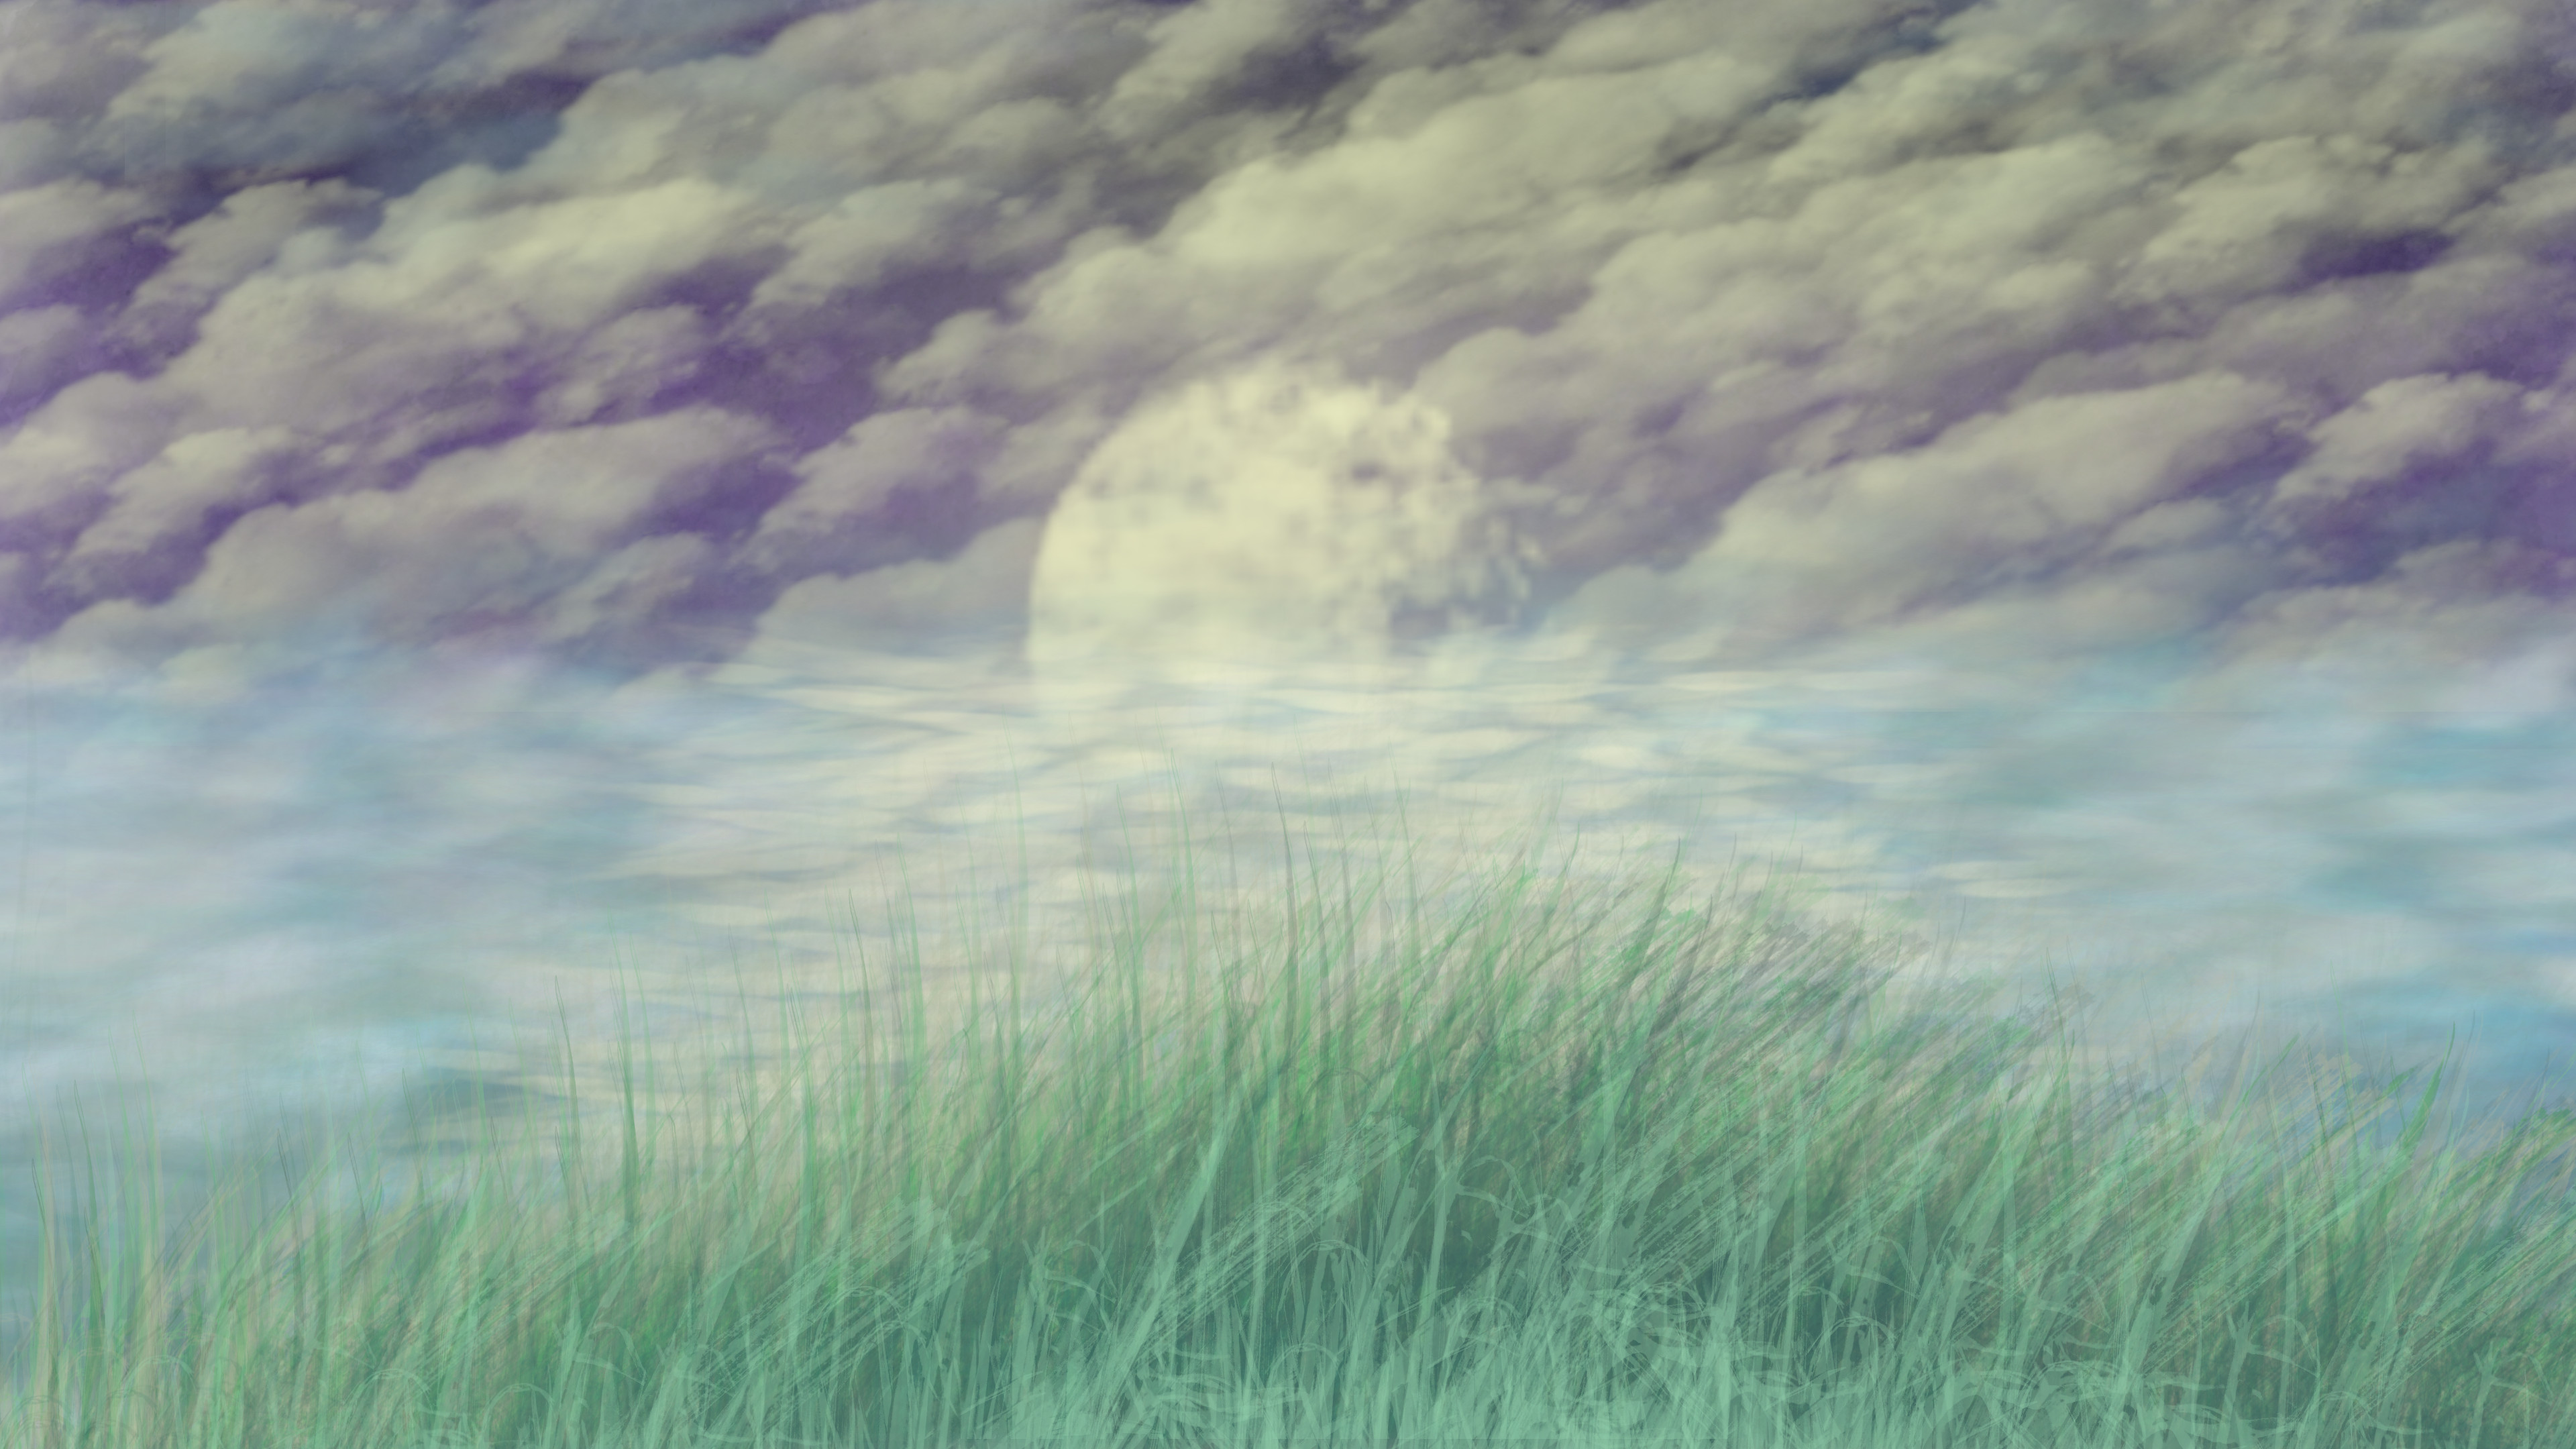 A moon in the sky floats over a ominous swamp.